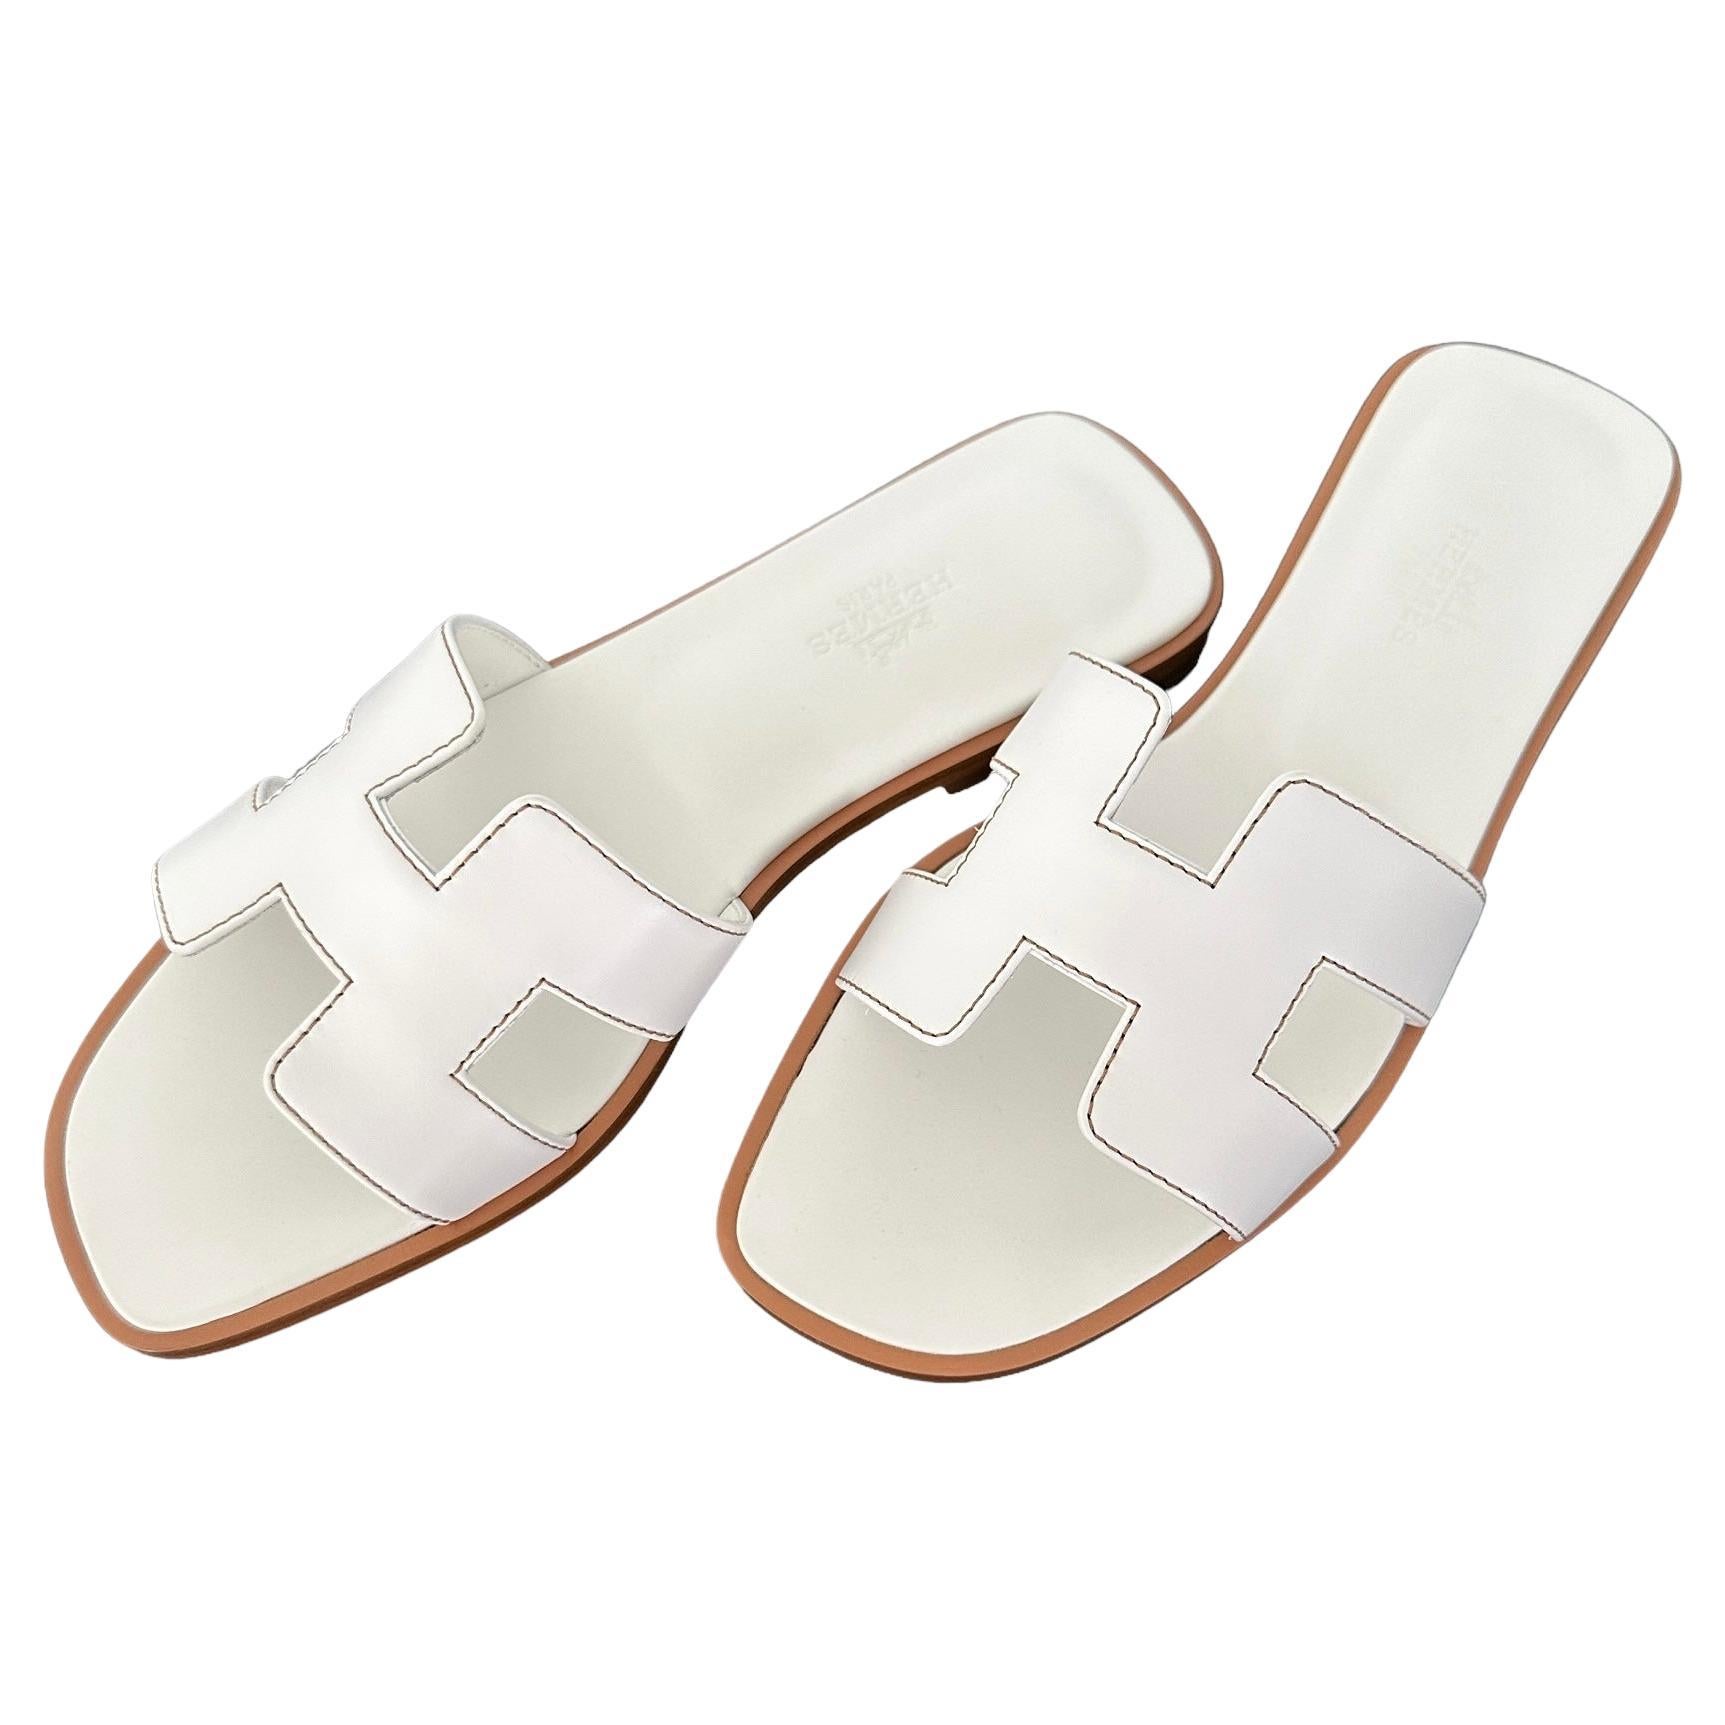 Hermes Oran White Sandals Size 36 New For Sale